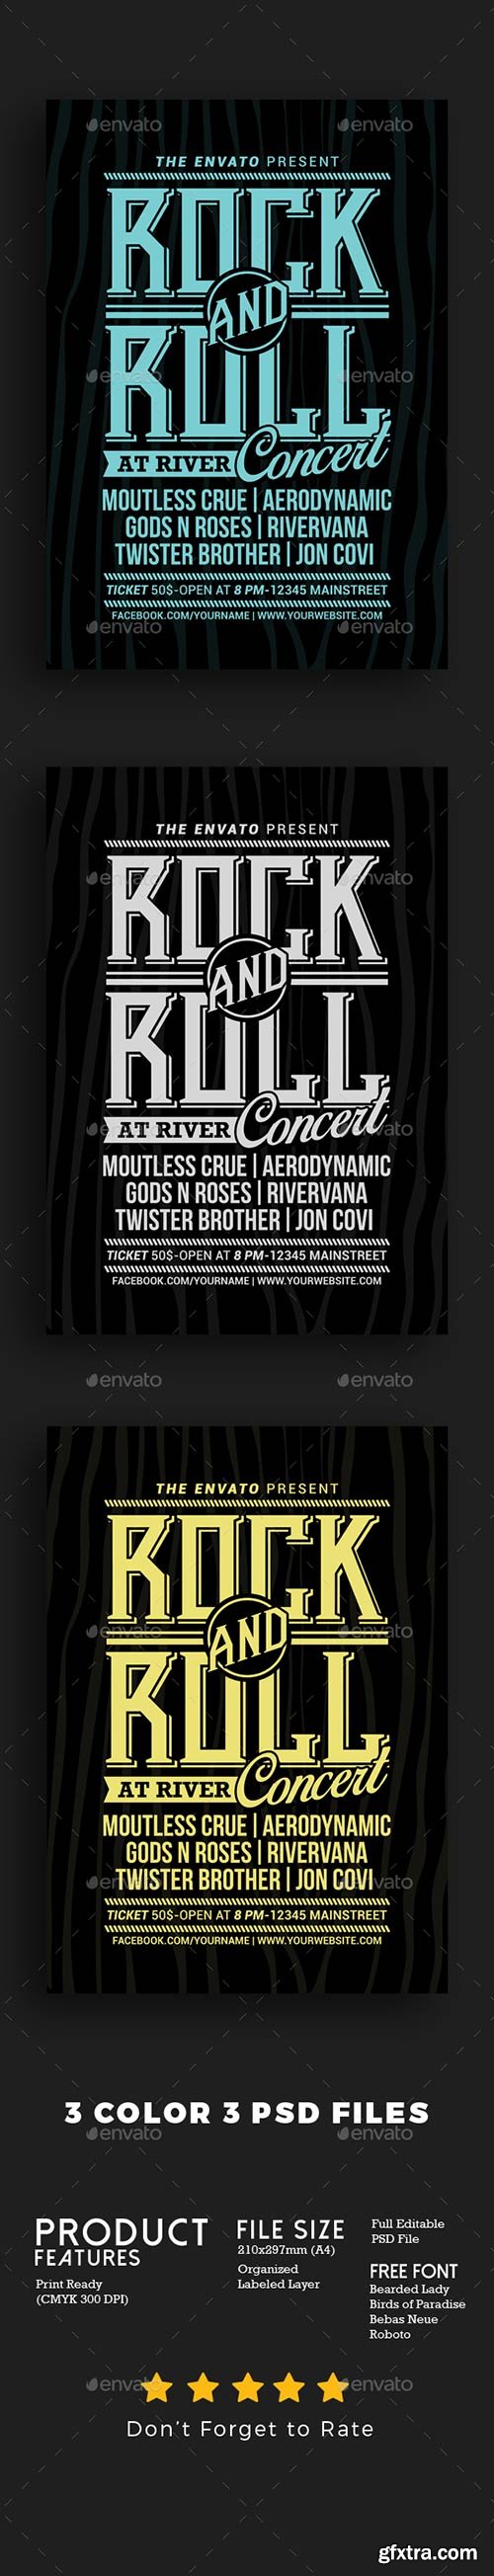 Graphicriver - Rock and Roll Music Concert 20461205